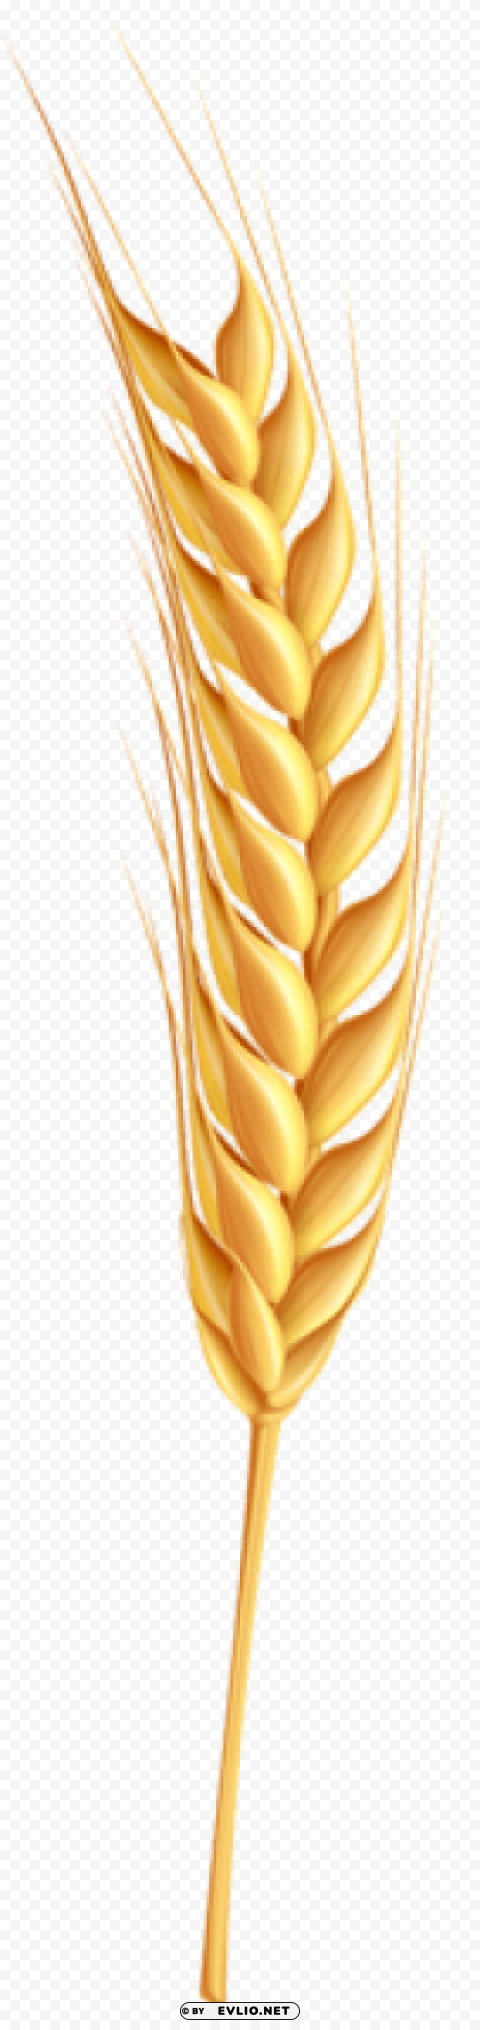 Wheat PNG free download